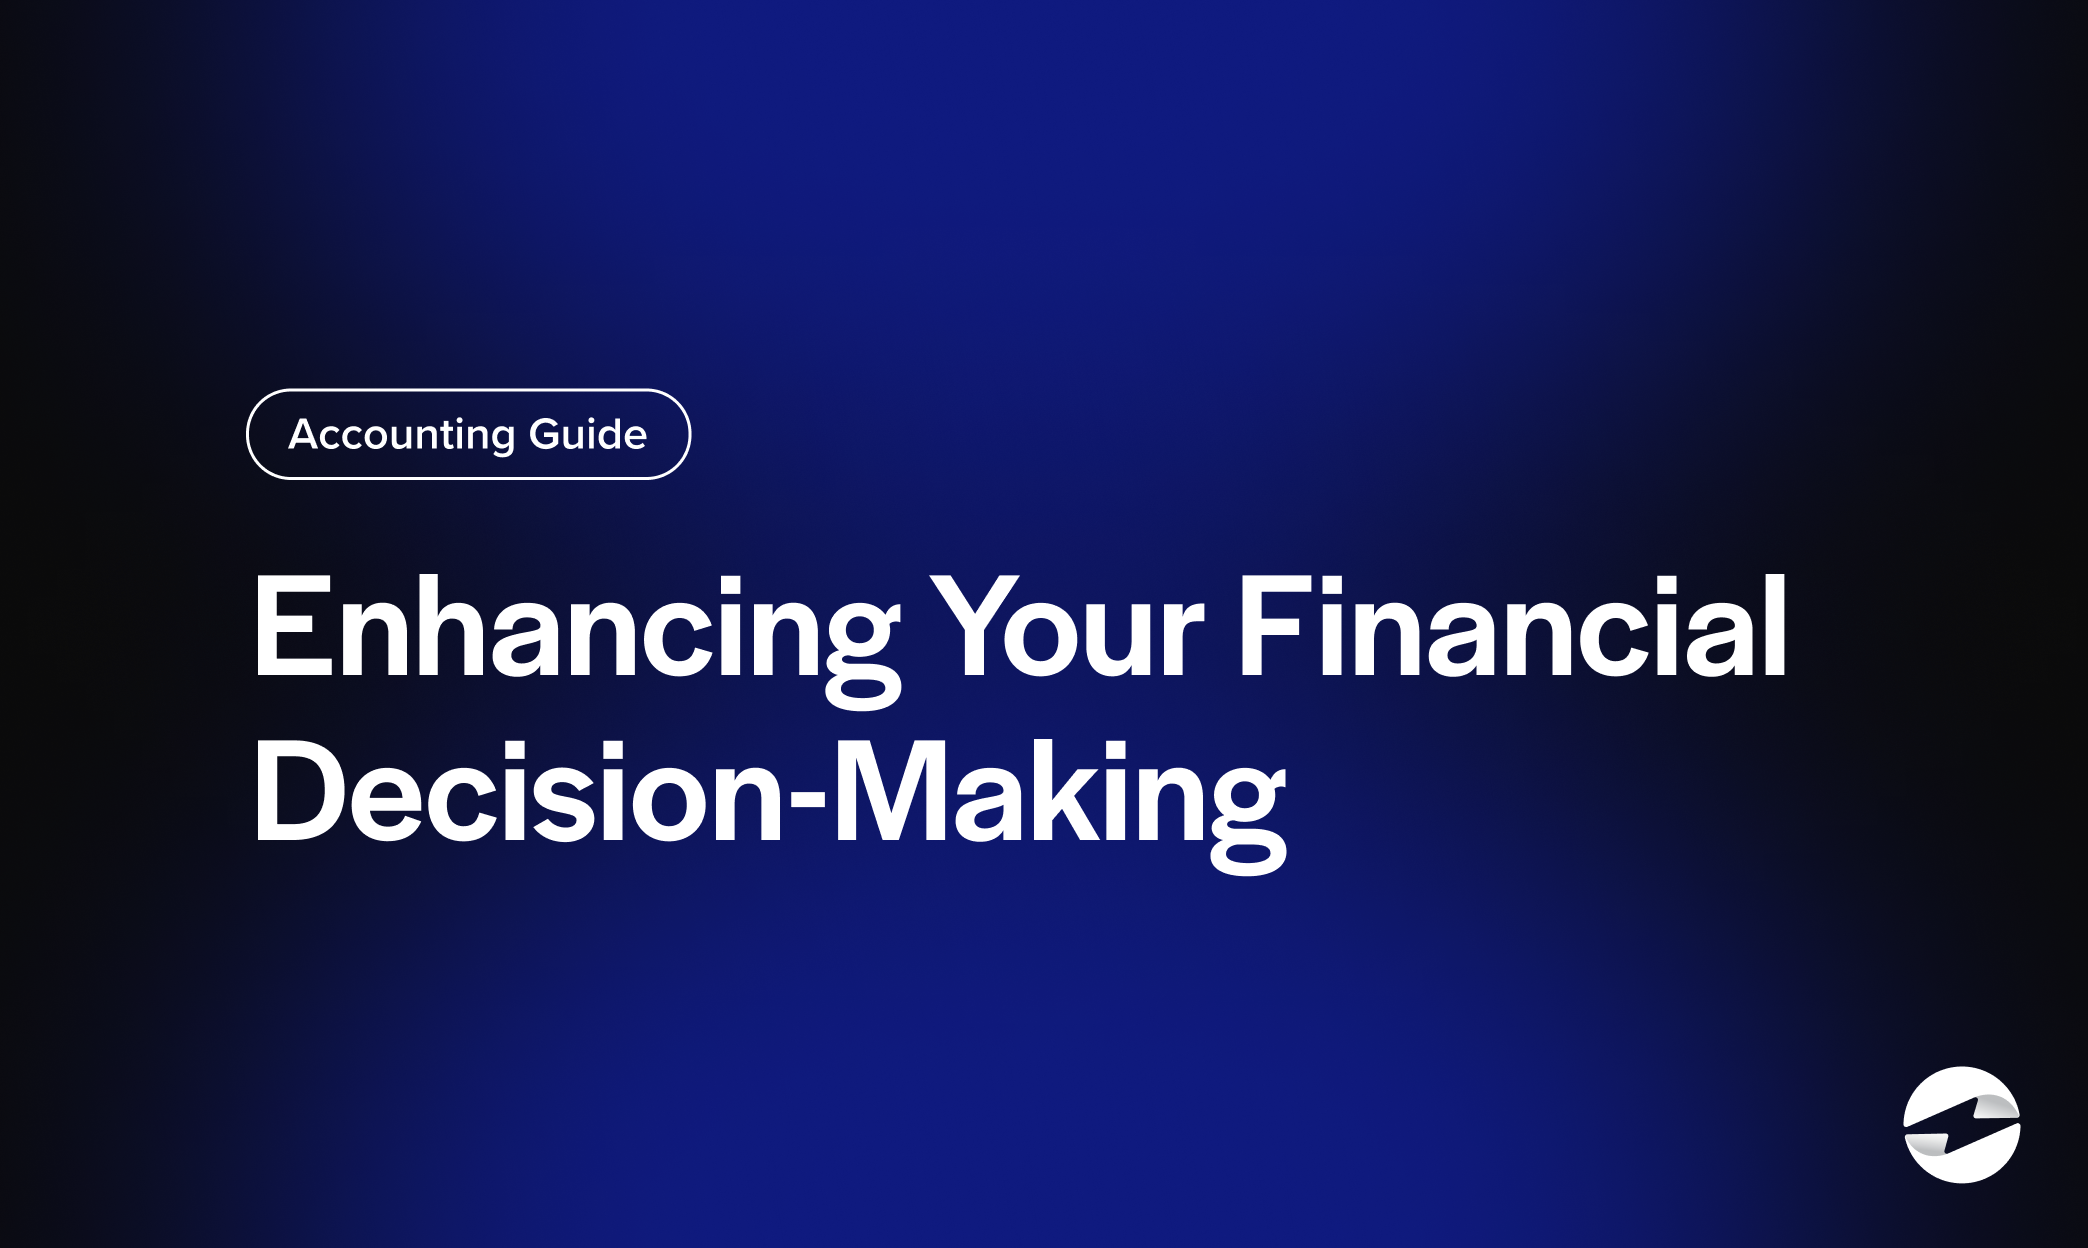 Enhancing Your Financial Decision-Making